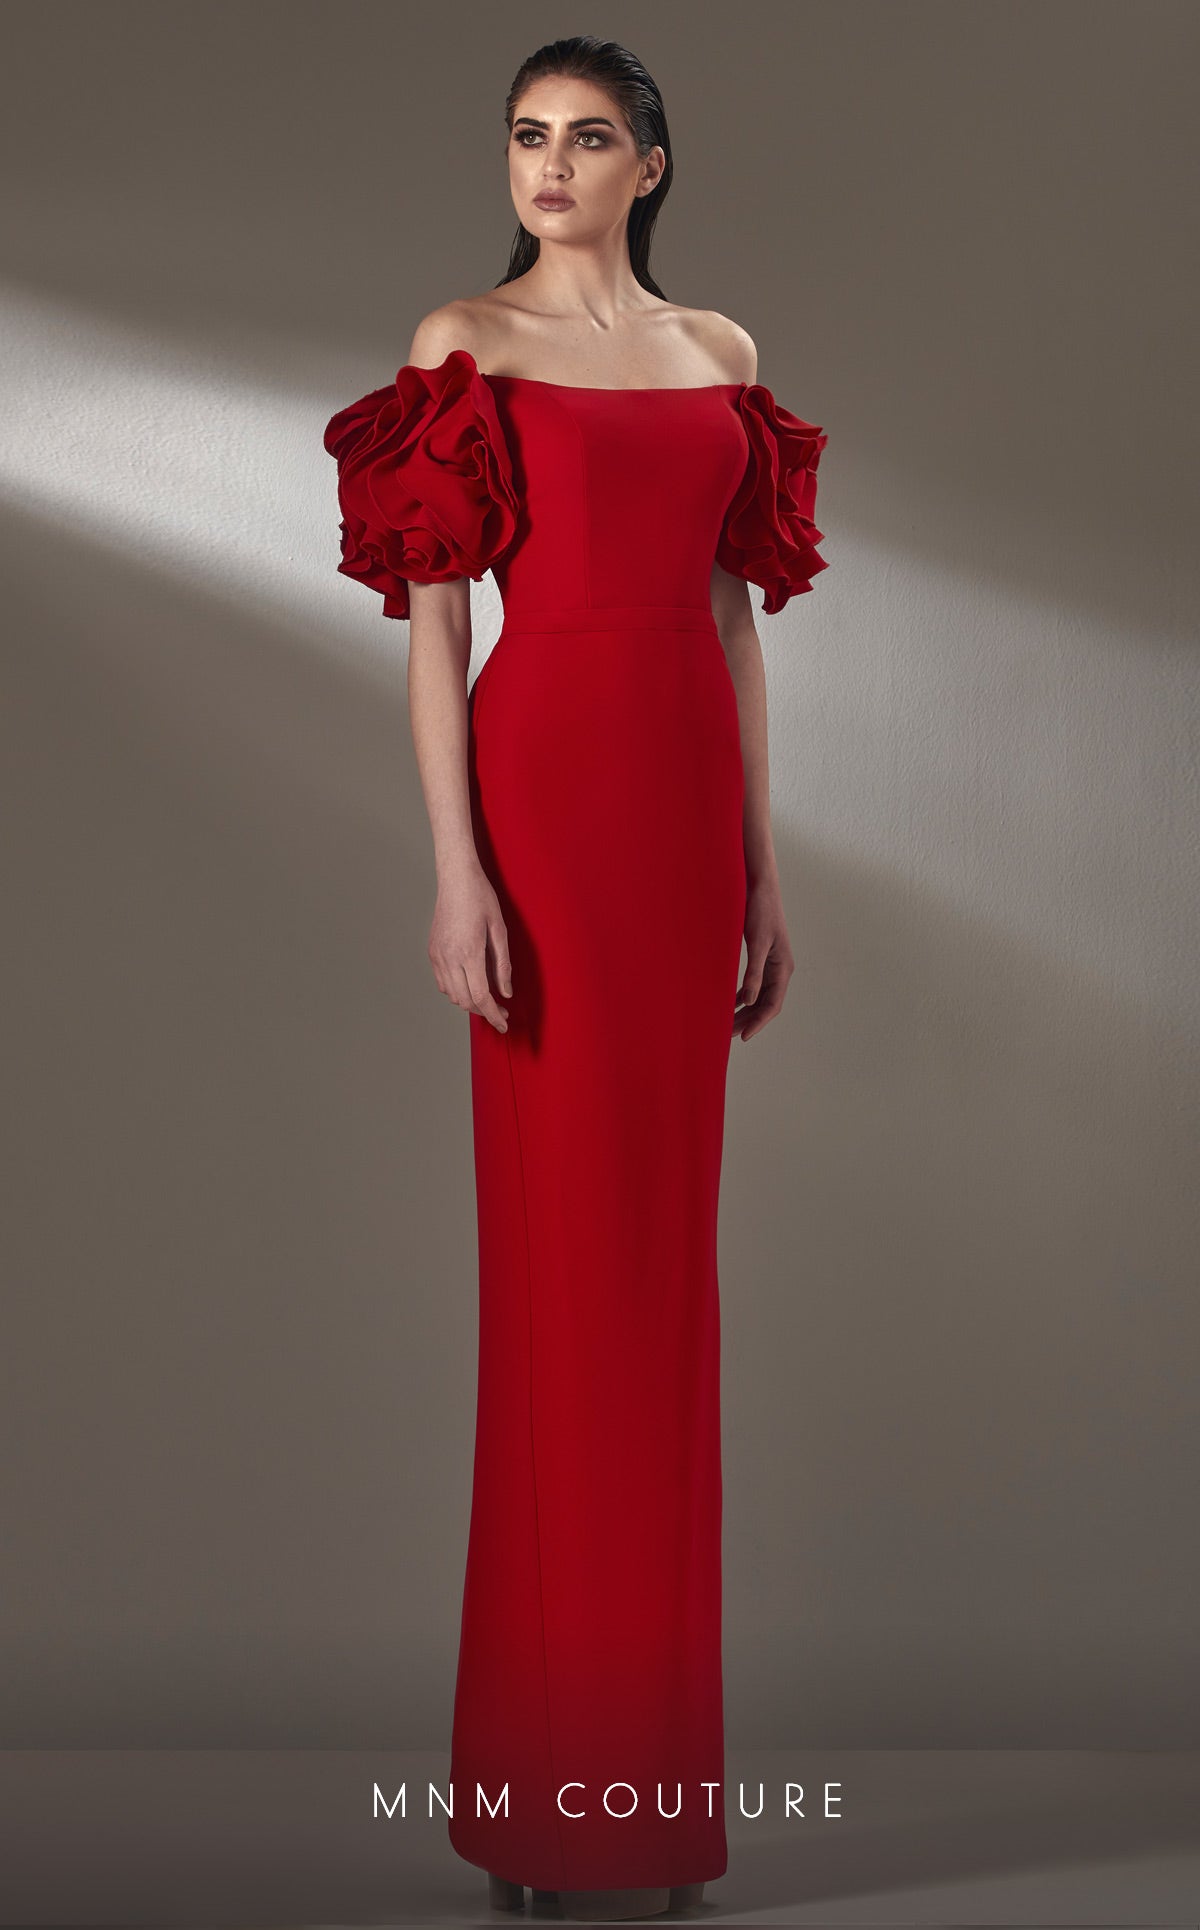 MNM Couture simple and sophisticated beauty. This off the shoulder style with back slit and gorgeous sleeve detail.